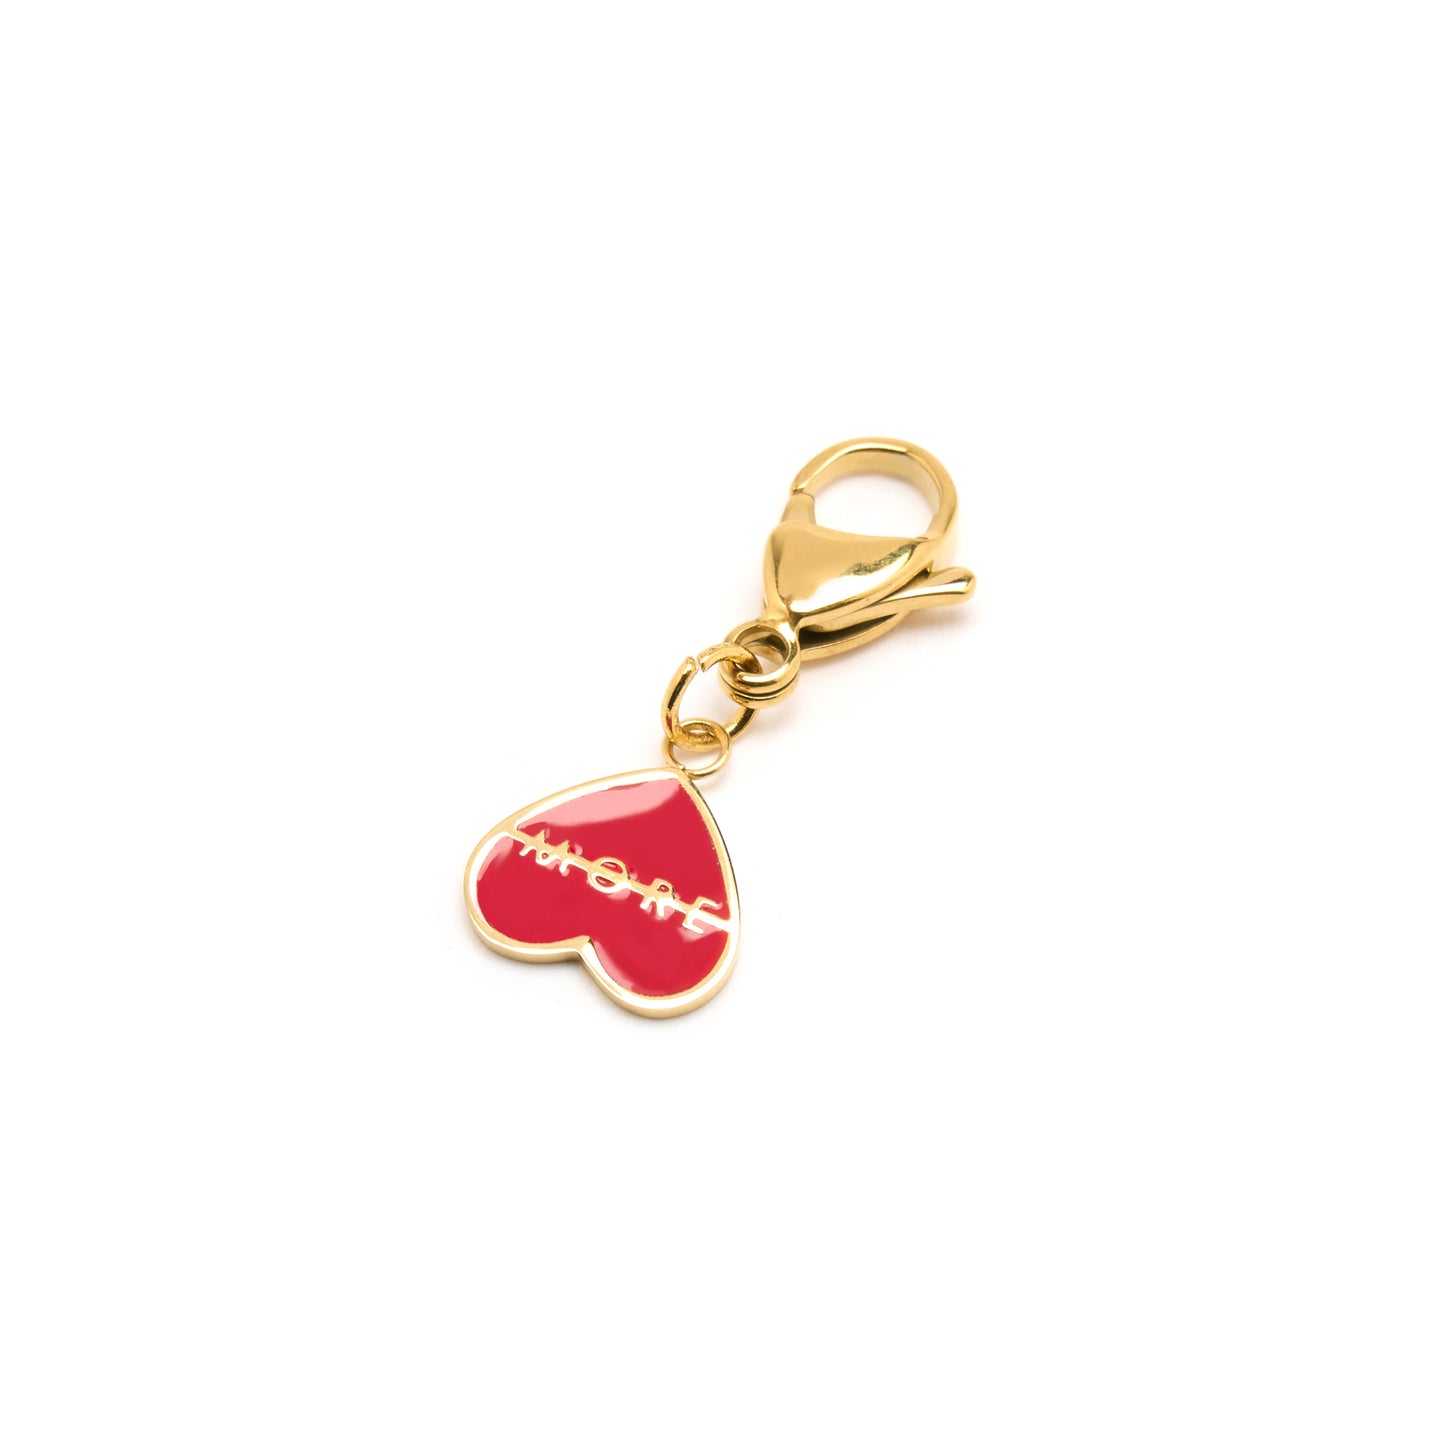 A-MORE Charm - Cuore Rosso